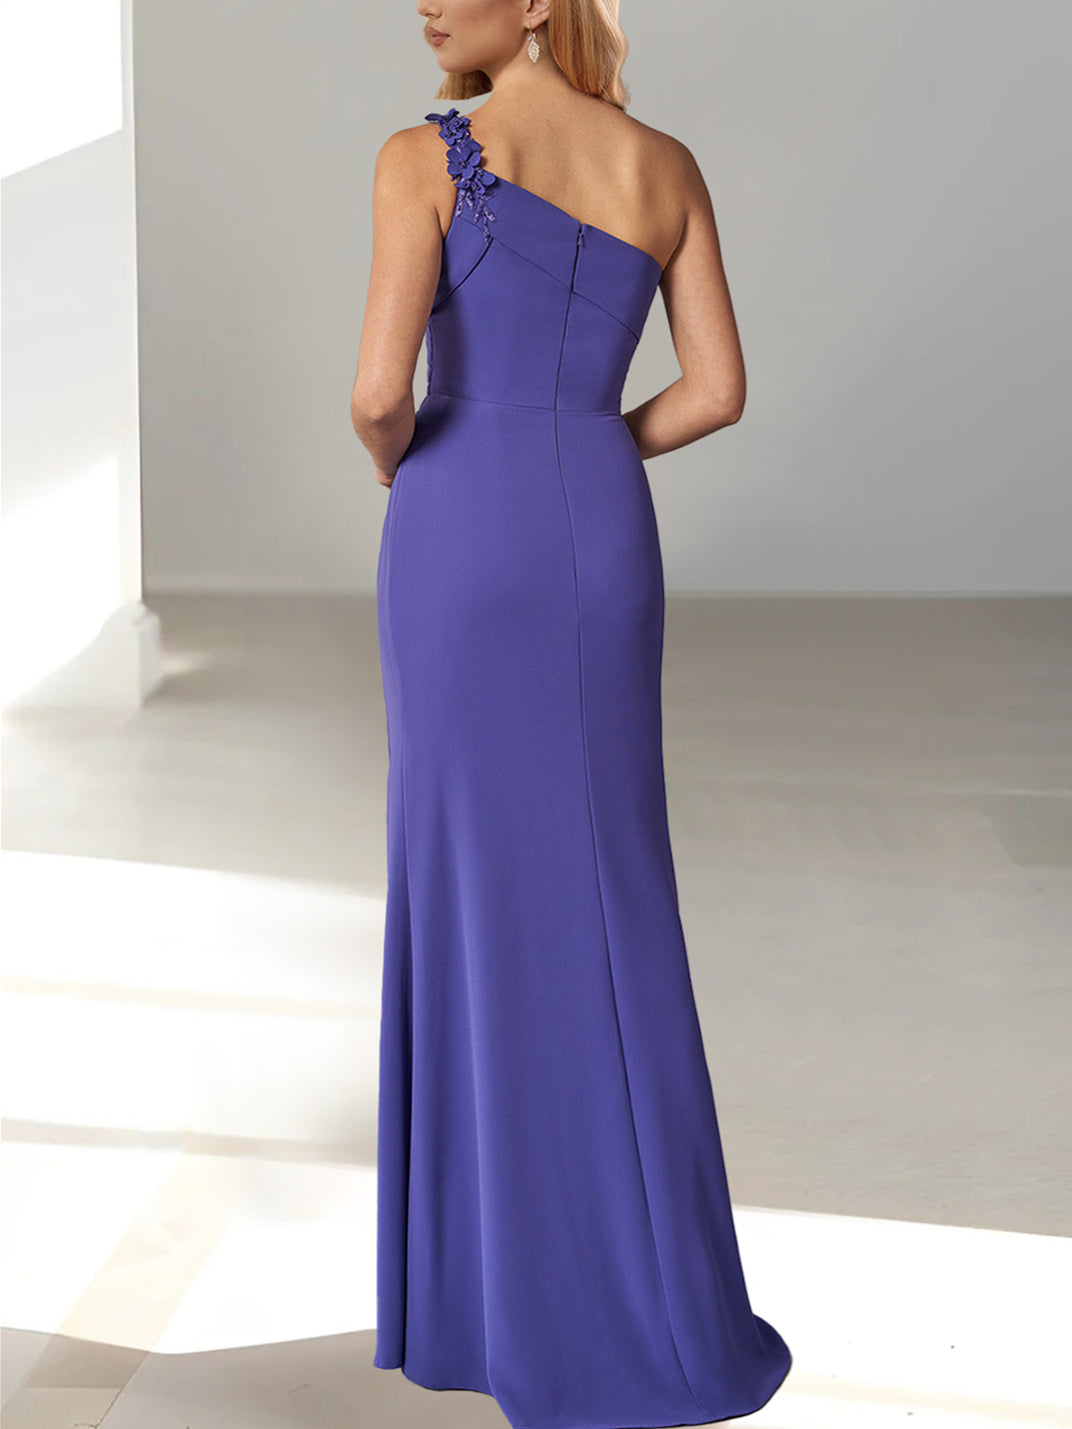 Sheath/Column Sleeveless One Shoulder Floor-Length Mother of the Bride Dresses with Beaded